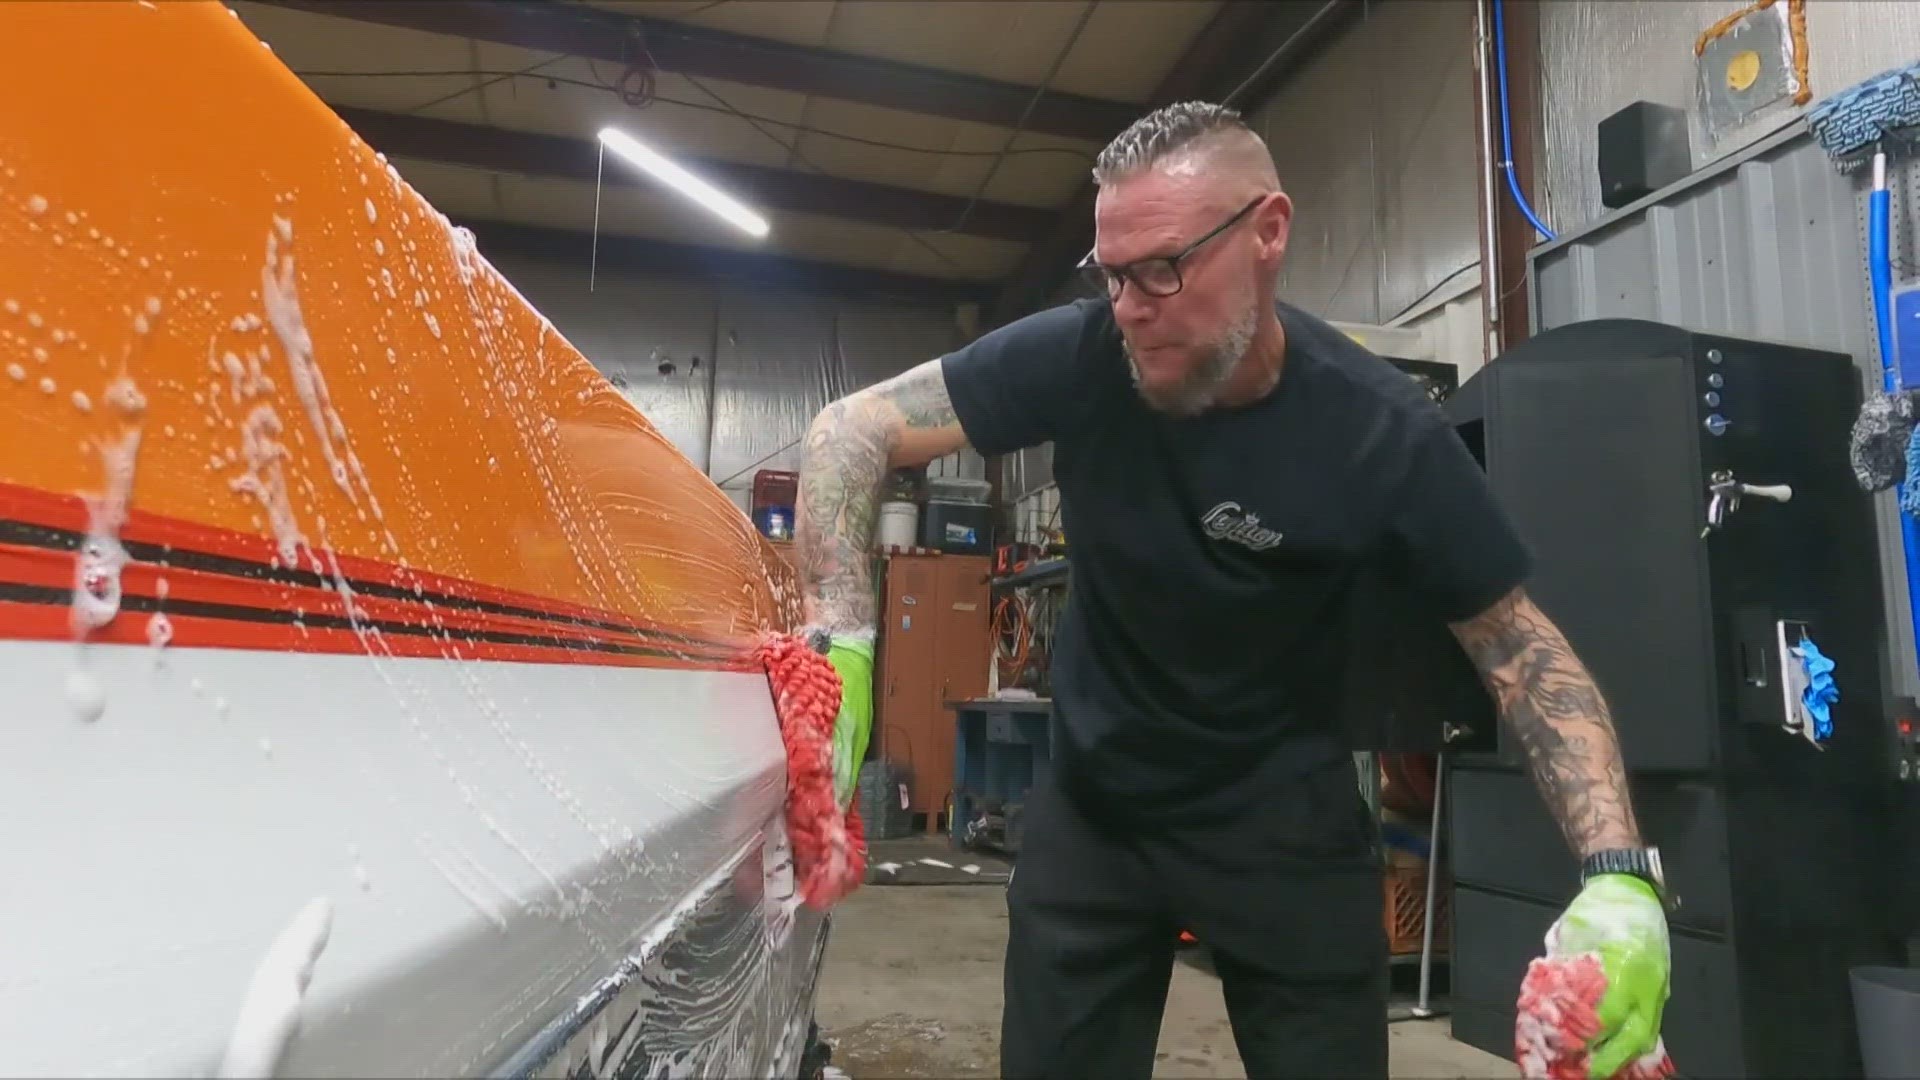 Christopher Zweifel is a former drug addict who turned his life around with an auto-detailing business. Now, he's inspiring others to do the same.